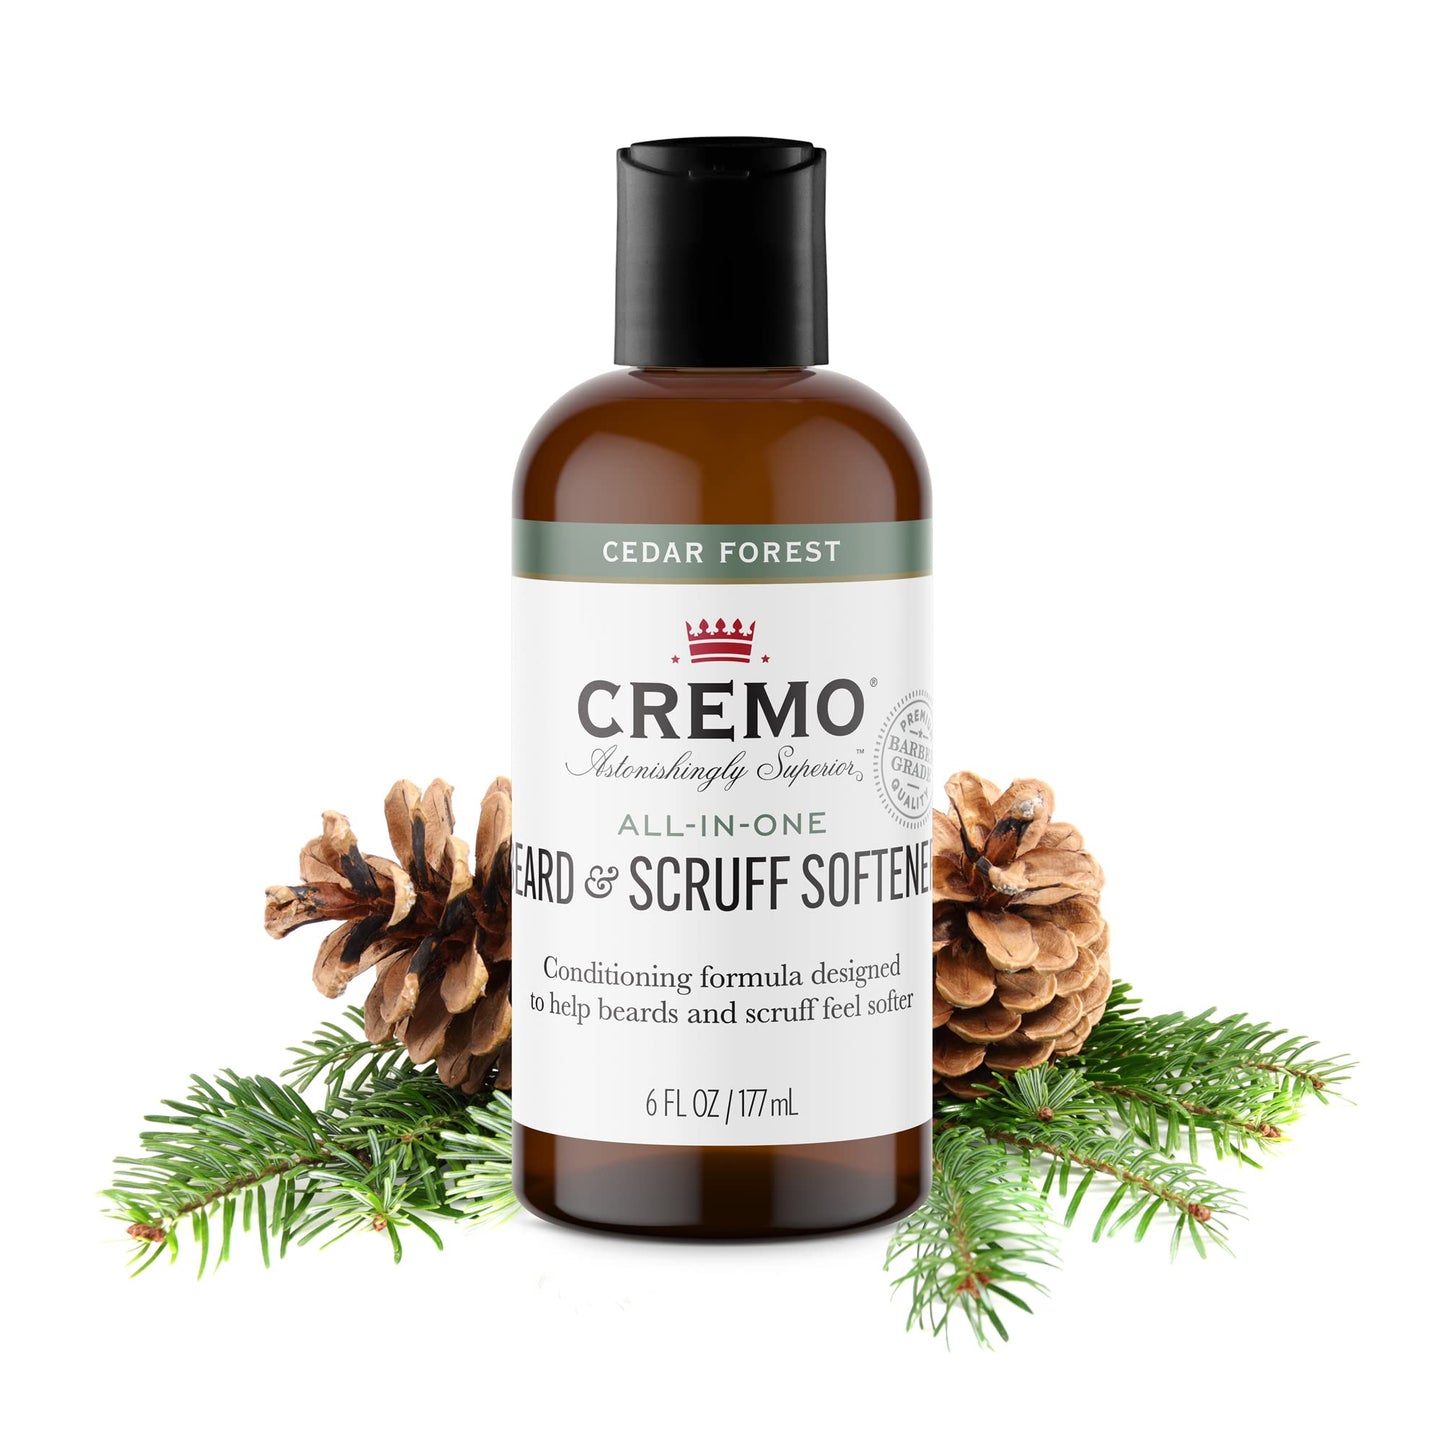 Cremo Cedar Forest Beard & Scruff Softener, Softens and Conditions Coarse Facial Hair of all Lengths in Just 30 Seconds, 6 Fluid Ounce